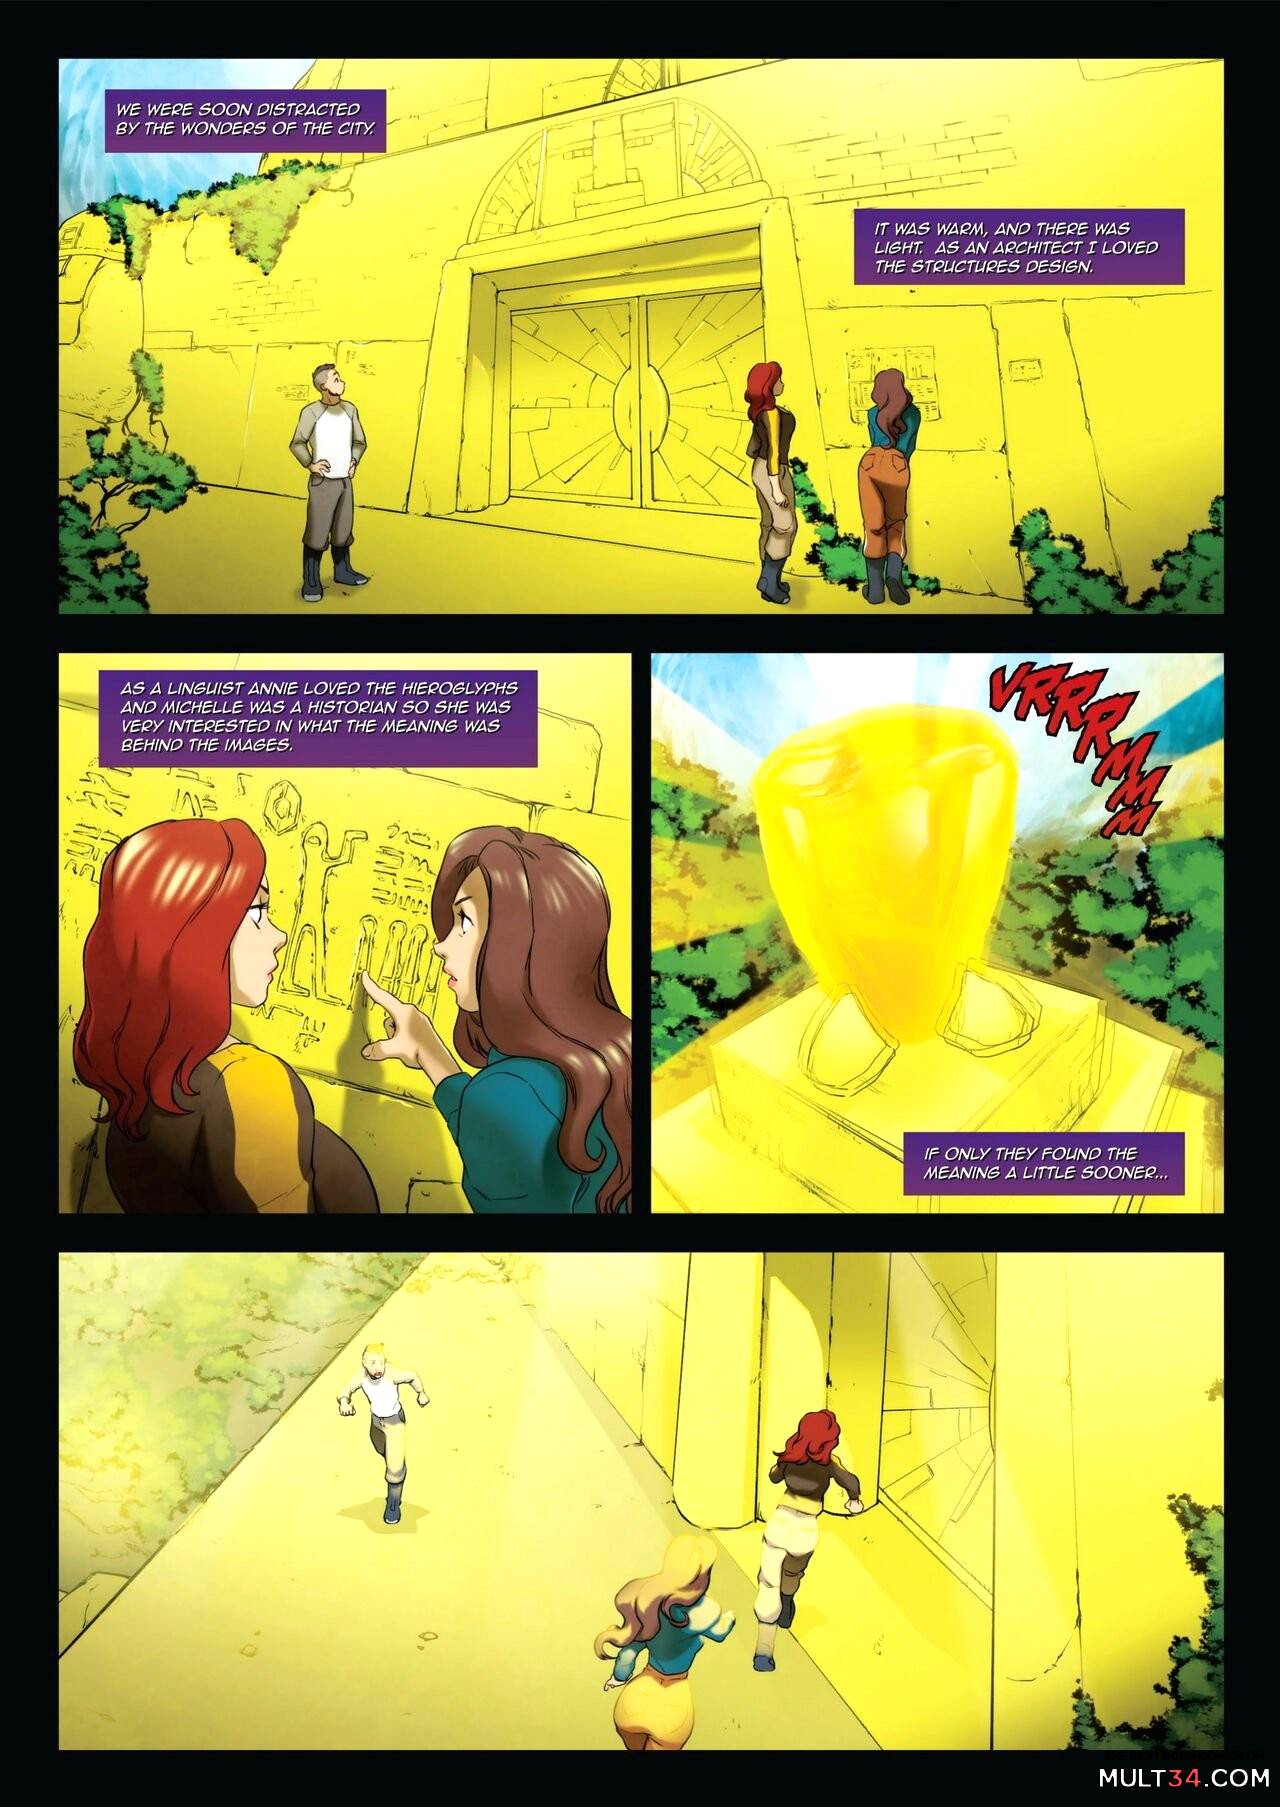 Lost City of Growth page 9